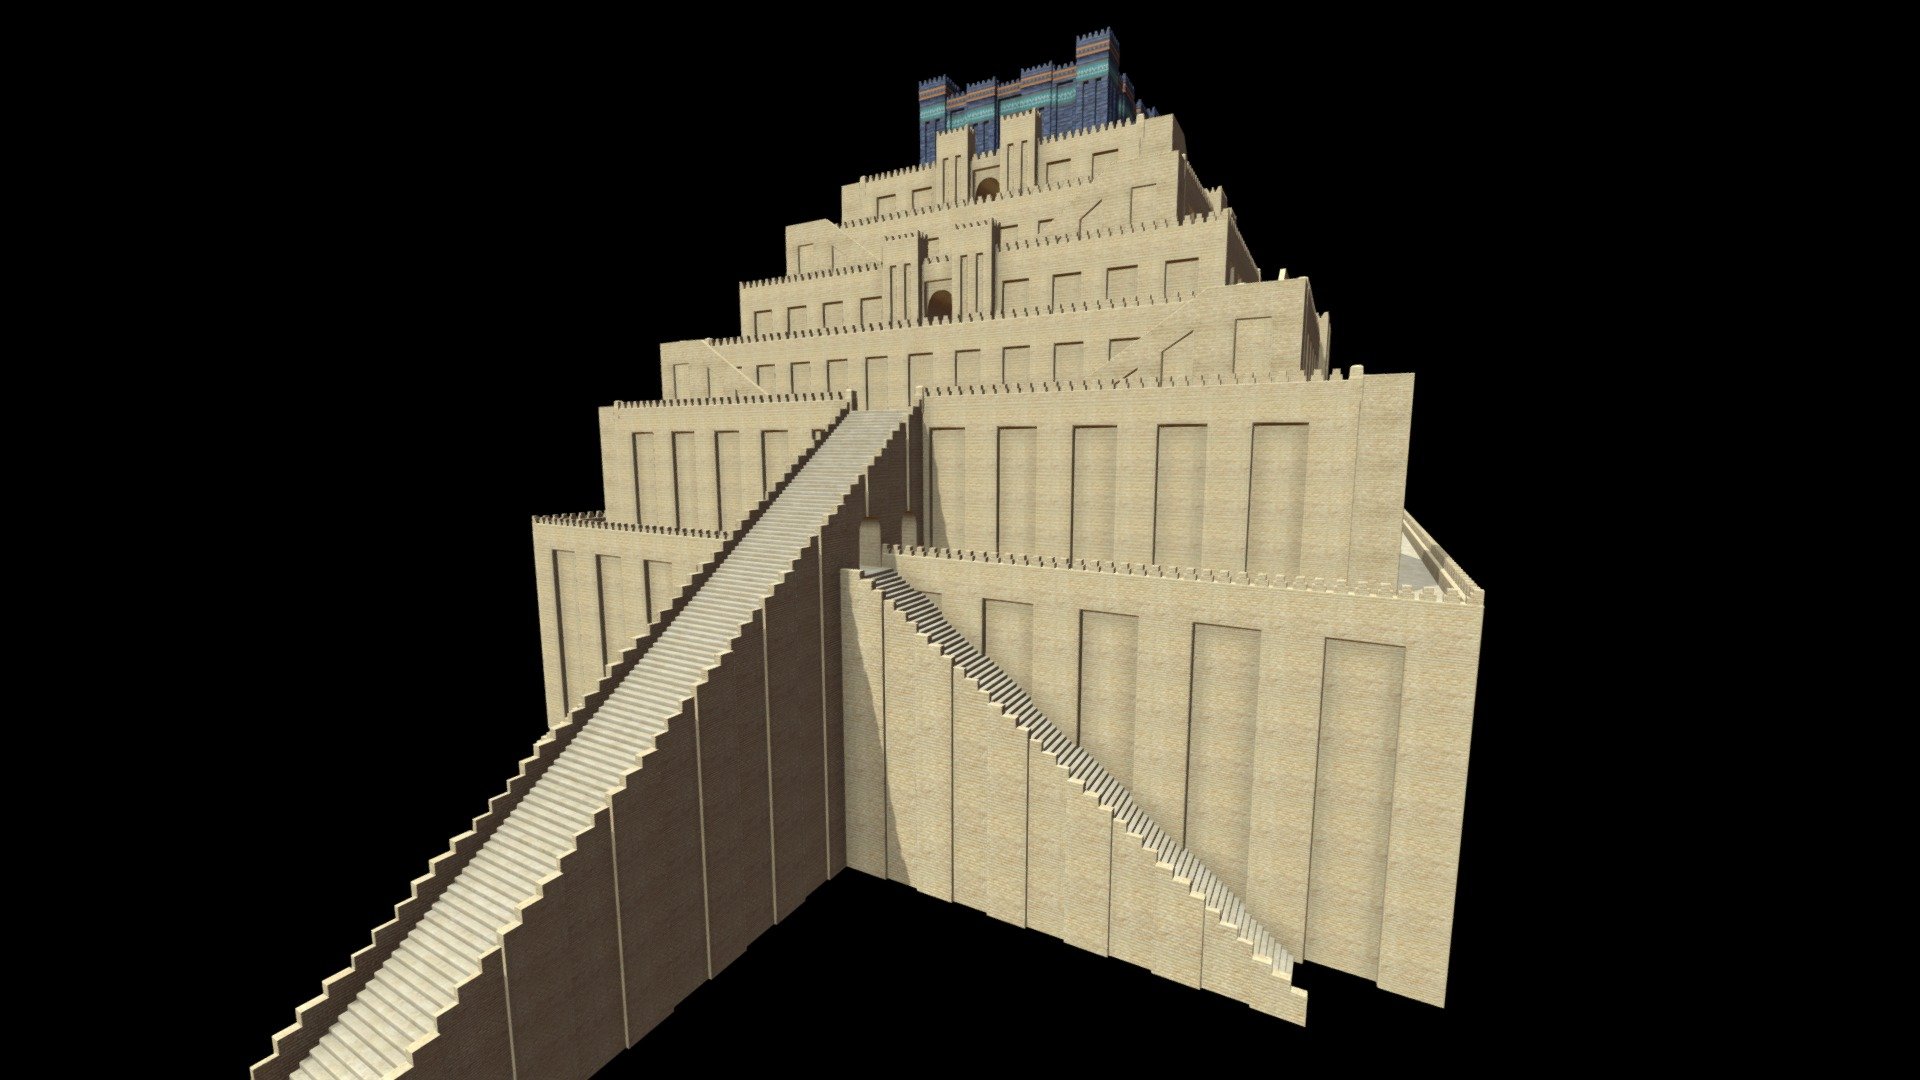 The Ziggurath of Babylon, the crazy big one with his seven terraced levels.
It was described by Herodote by his time, but I made it according to various model across internet that I have seen.

Here -&gt; https://youtu.be/qeSinXk4U7c                                                                               

You can see this model where I use it in a Timelapse video on Unreal Engine.

The height of the building is today estimated at about sixty meters, what was to be huge and massive in the center of an old city. 
In my Blender file the building made exactly 65 m and 99.21 cm&hellip; I had to drag on the scale a little bit accidentelly during modelization process ^^

Note : I don't put it on sale for the moment 3d model